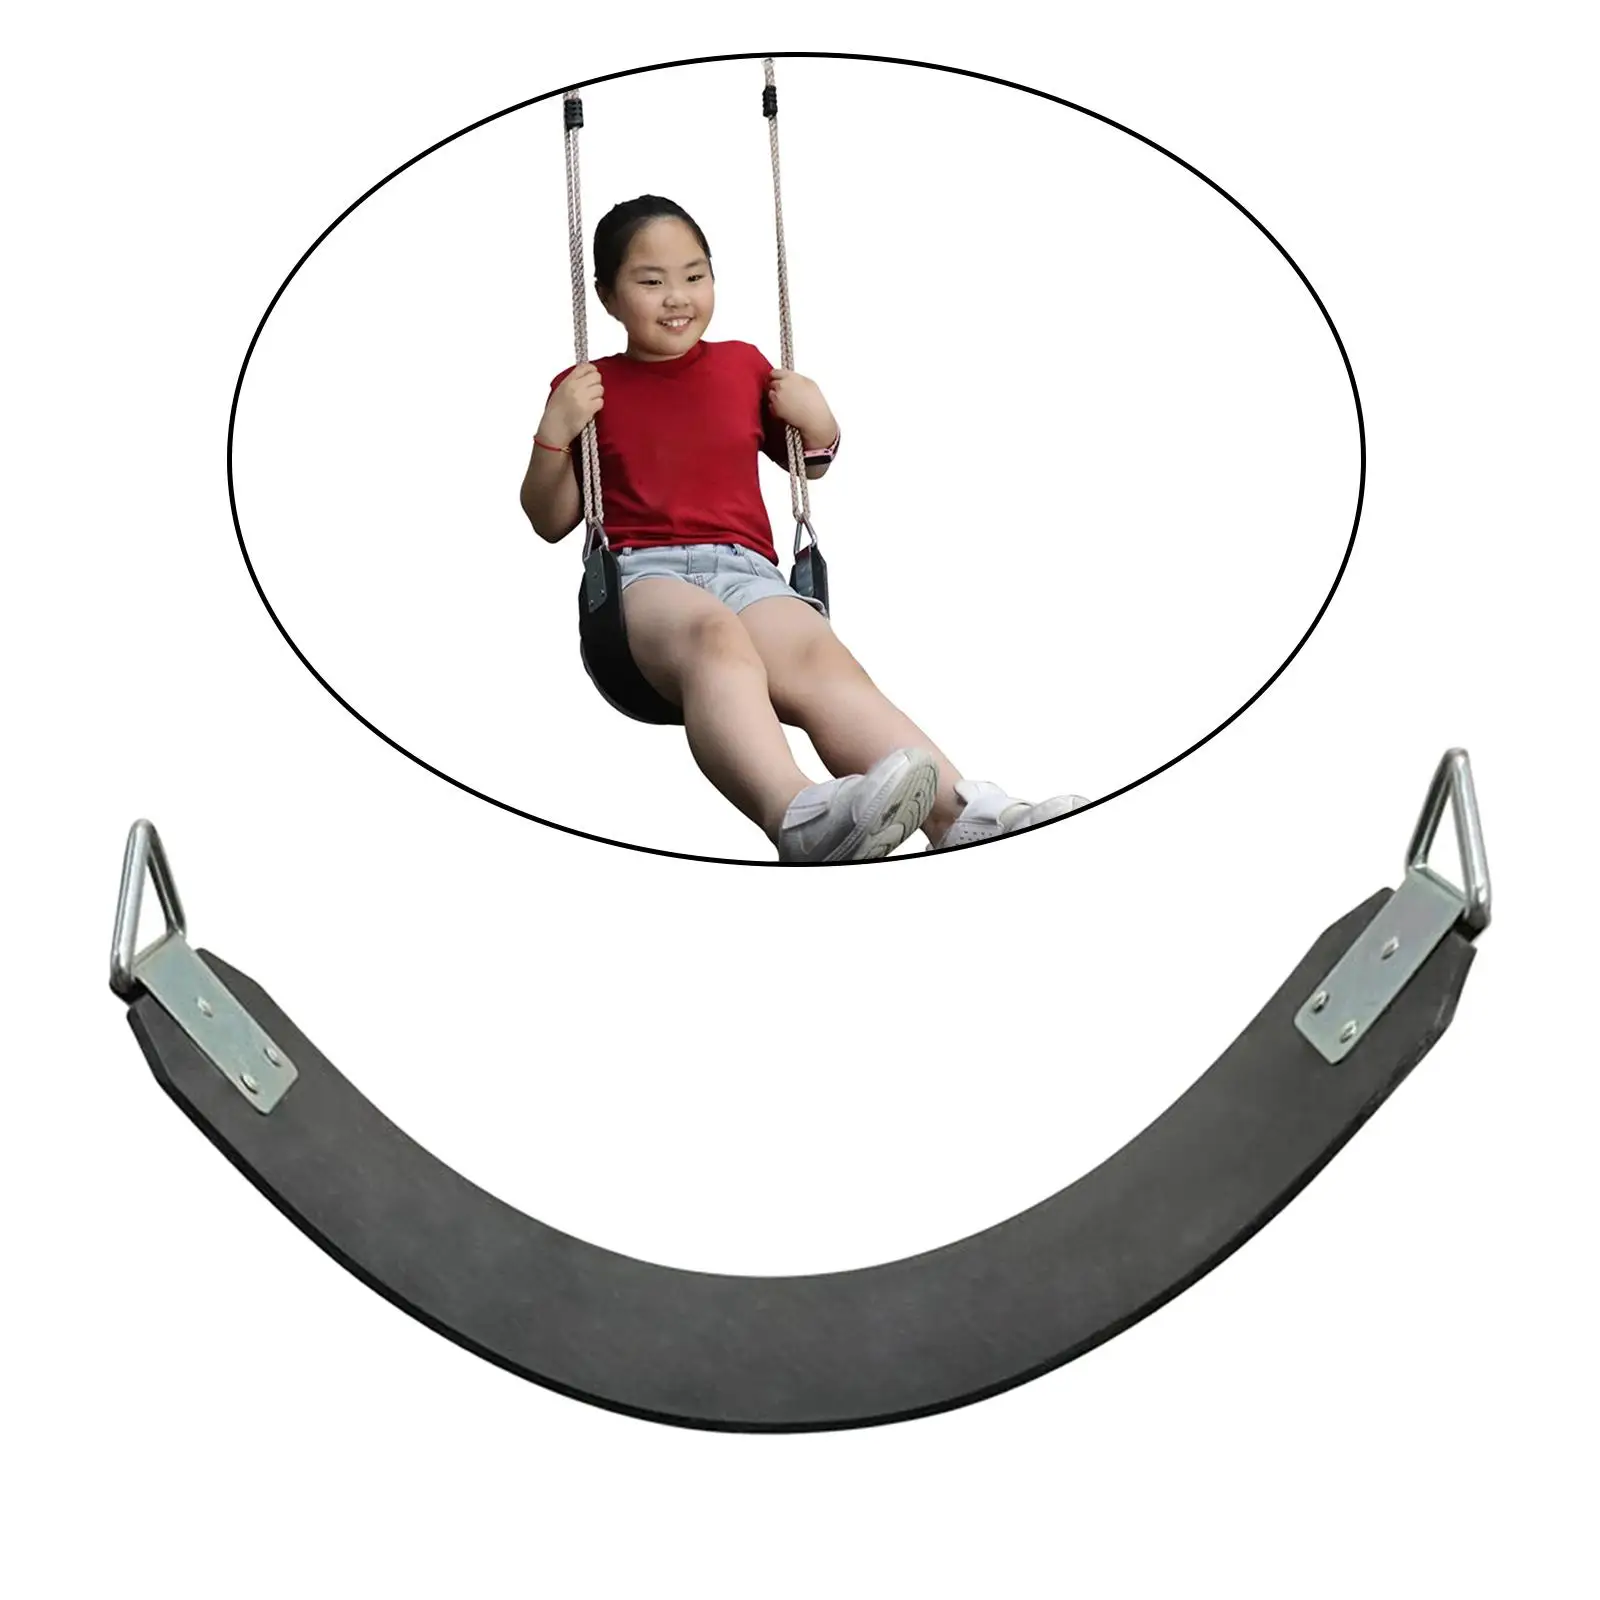 Rubber Swing Seat Garden Swings with Metal Triangle Rings Kids Toddler Toys Yard Swing for Park Gym Backyard Yard Outdoors